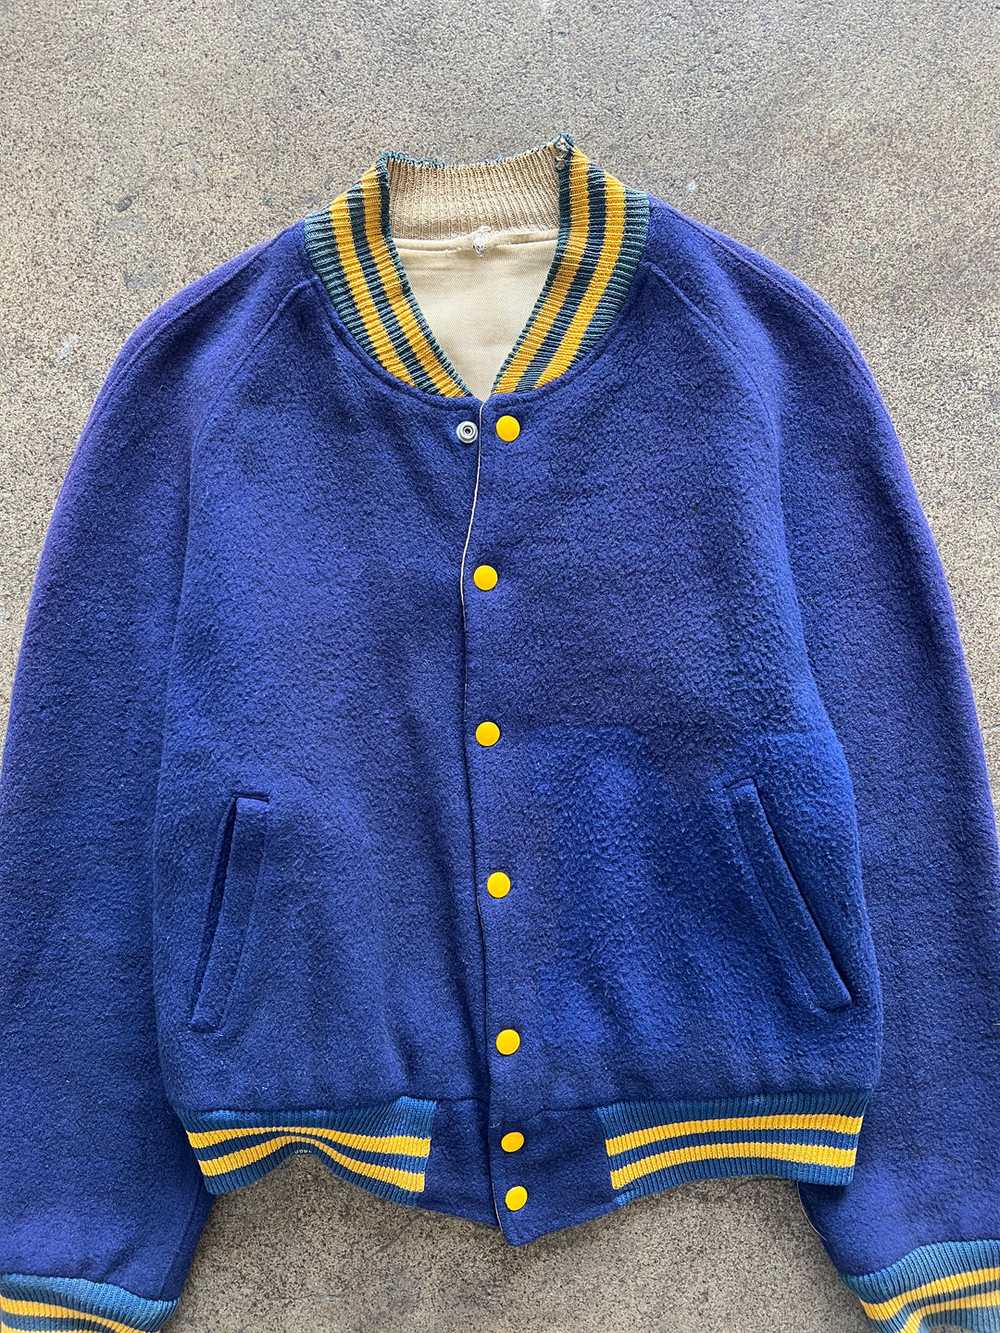 1950s Marquette Band Chain Stitch Varsity Jacket - image 2